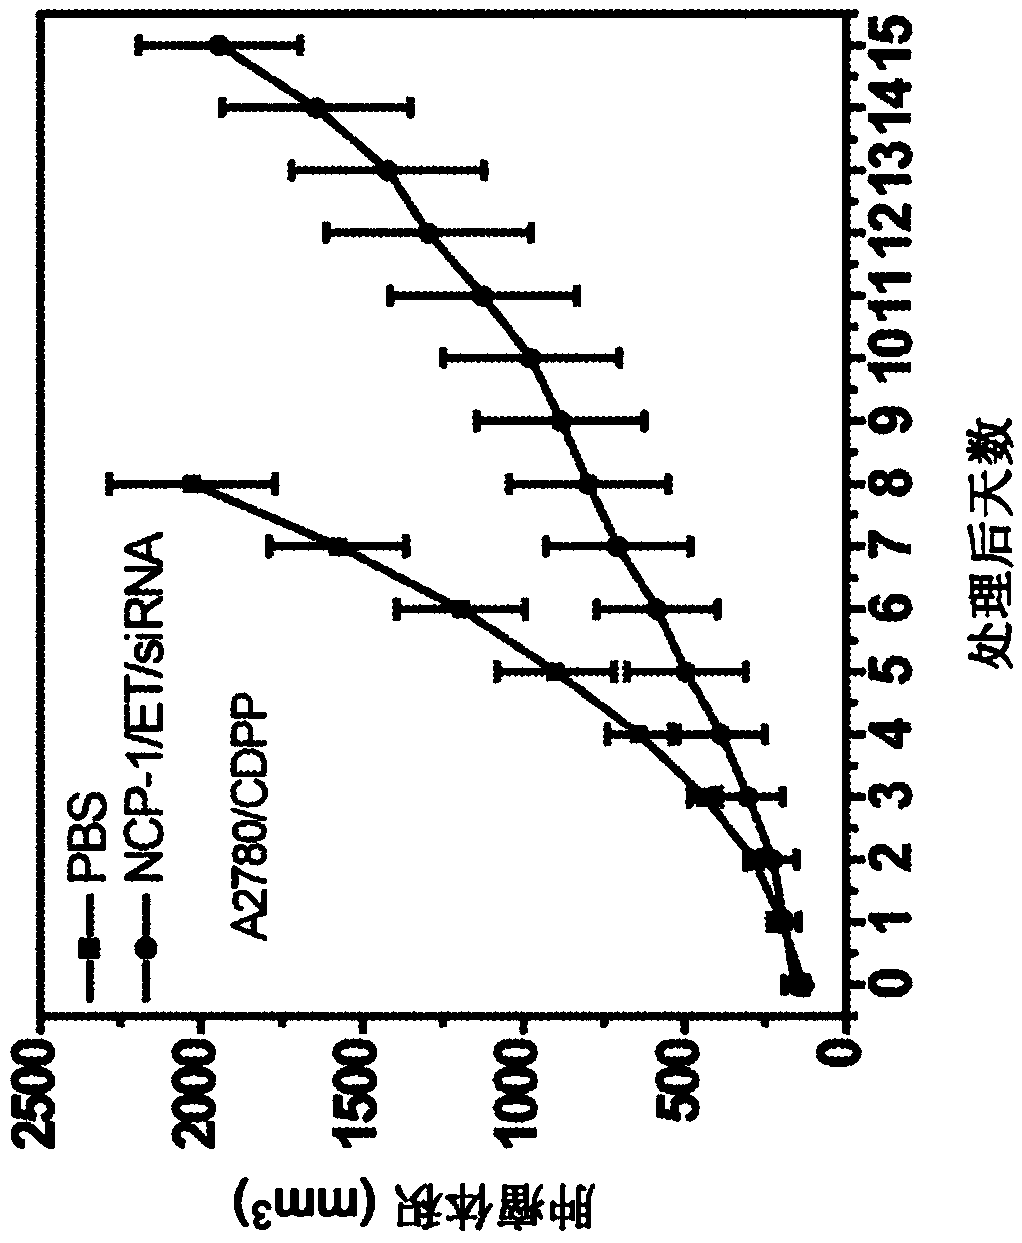 Nanoparticles for chemotherapy, targeted therapy, photodynamic therapy, immunotherapy, and any combination thereof